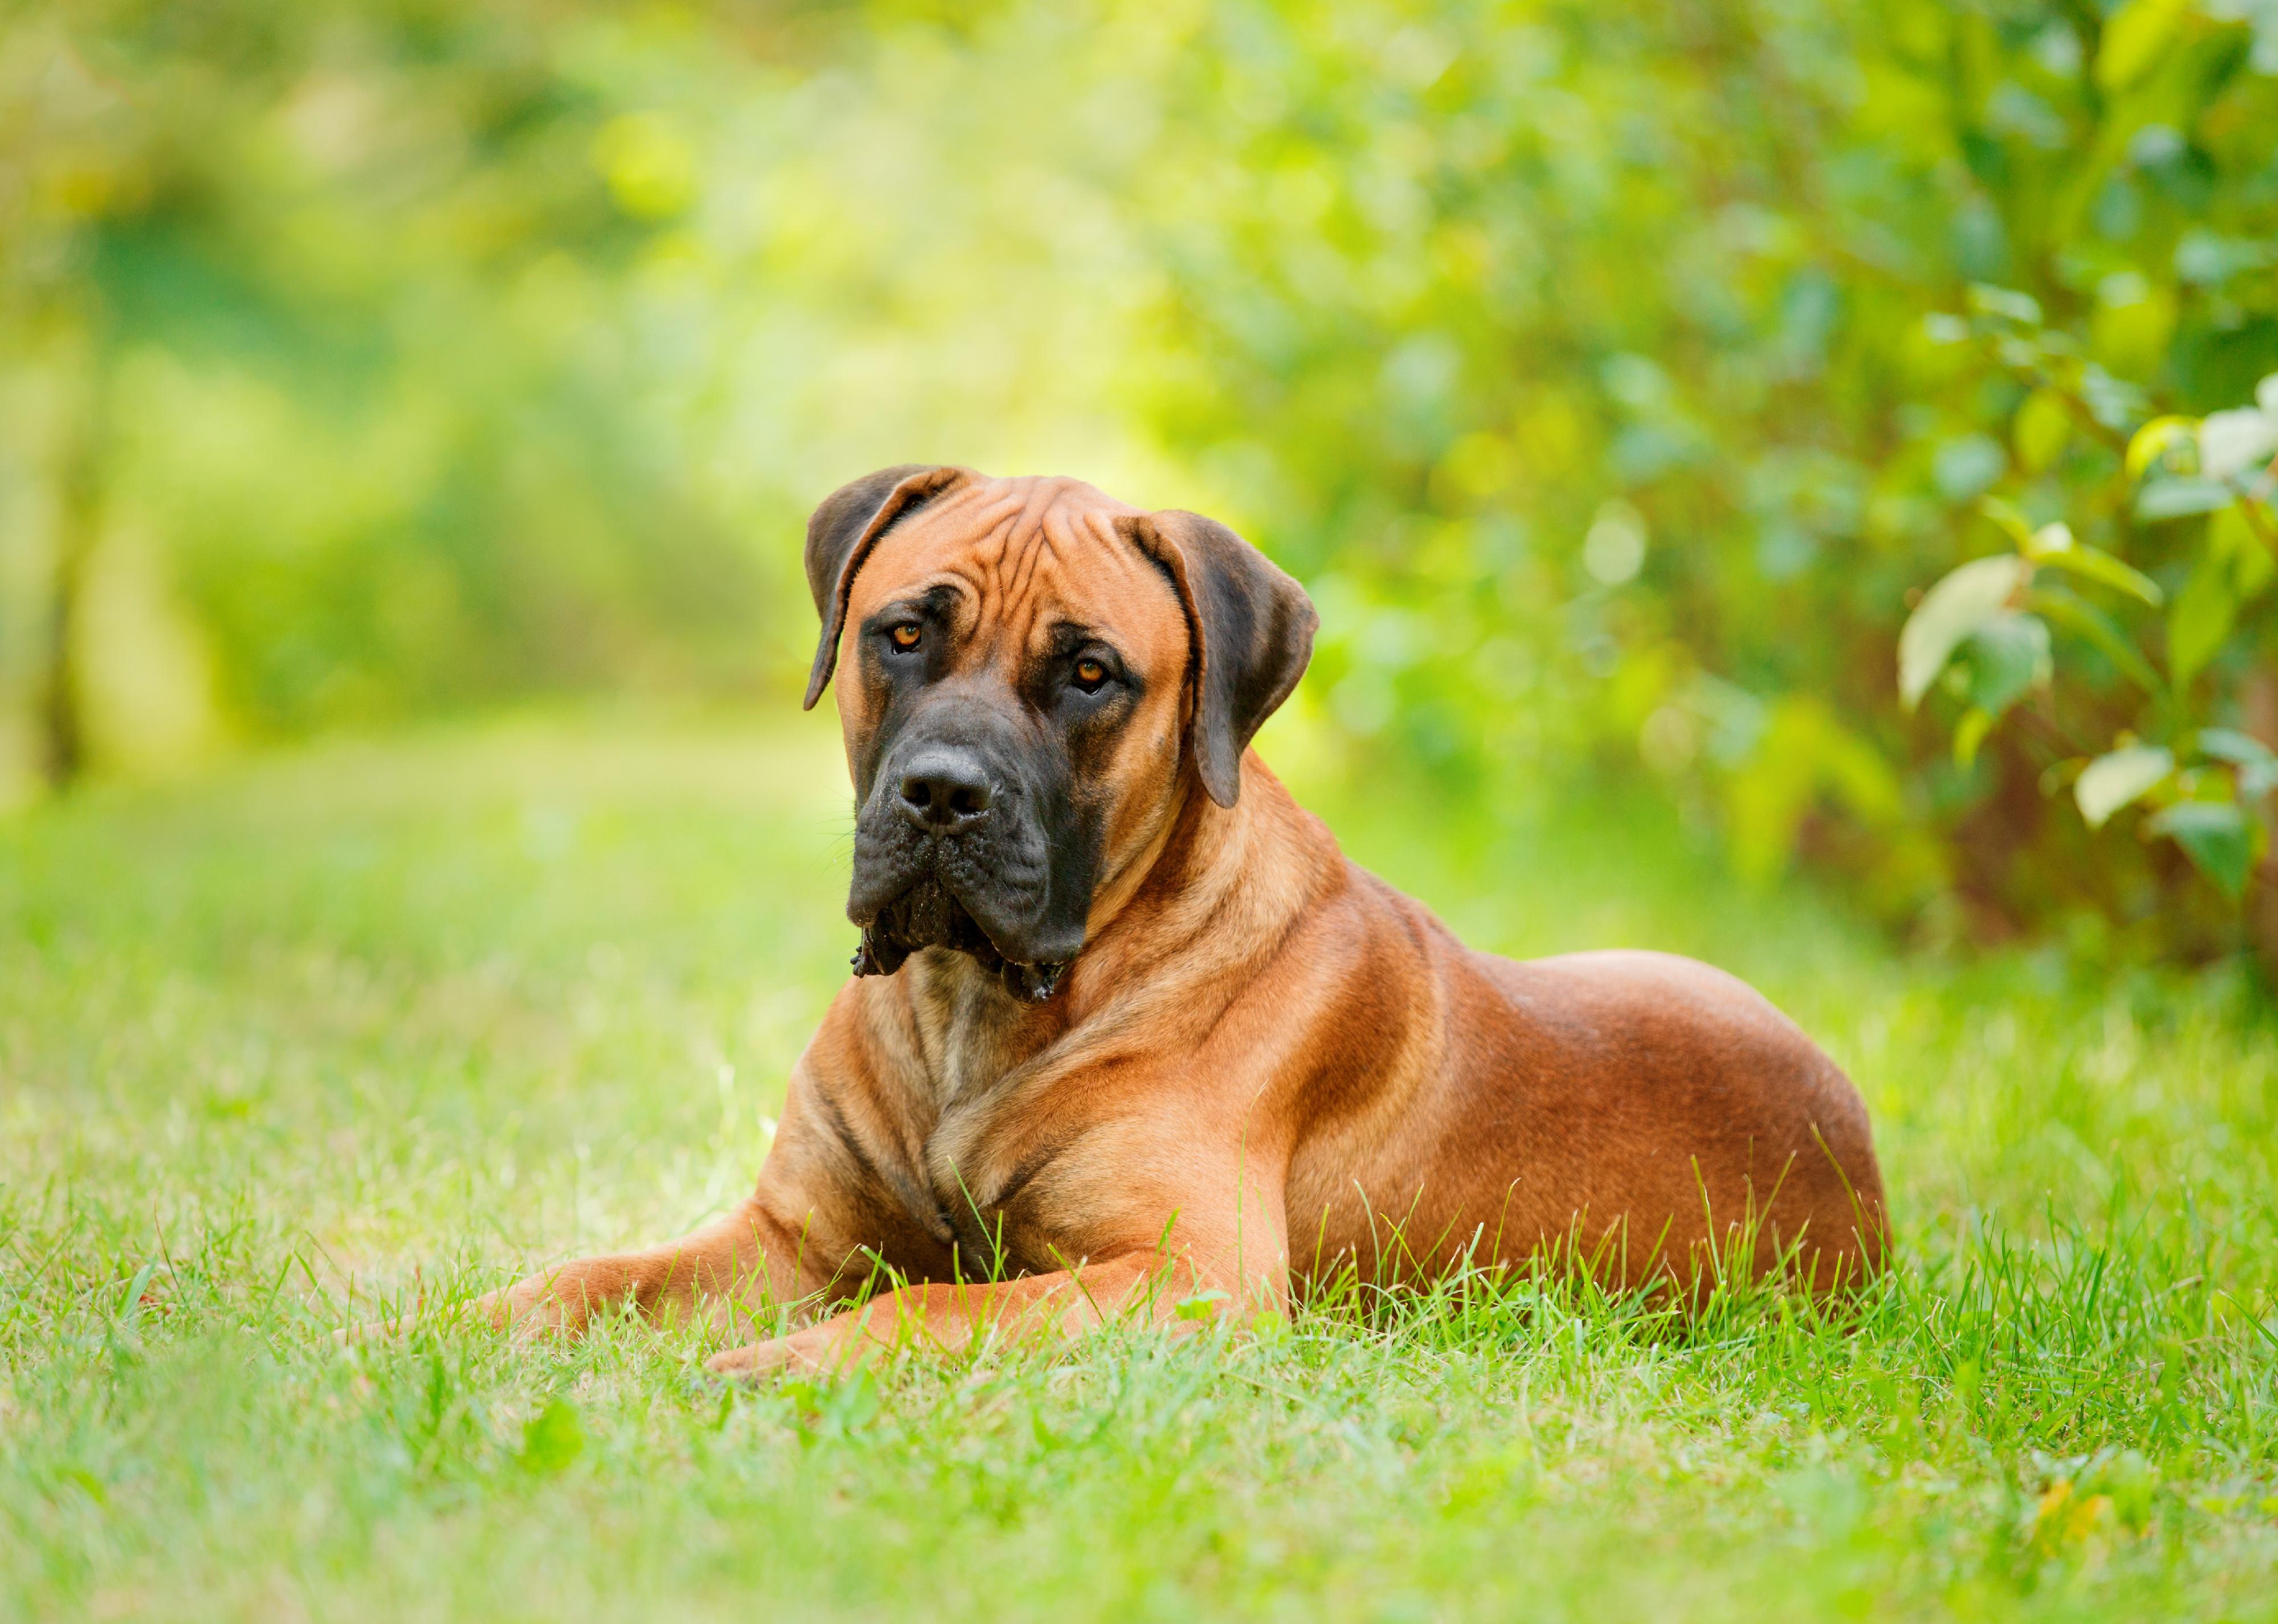 A Boerboel lying in some grass.